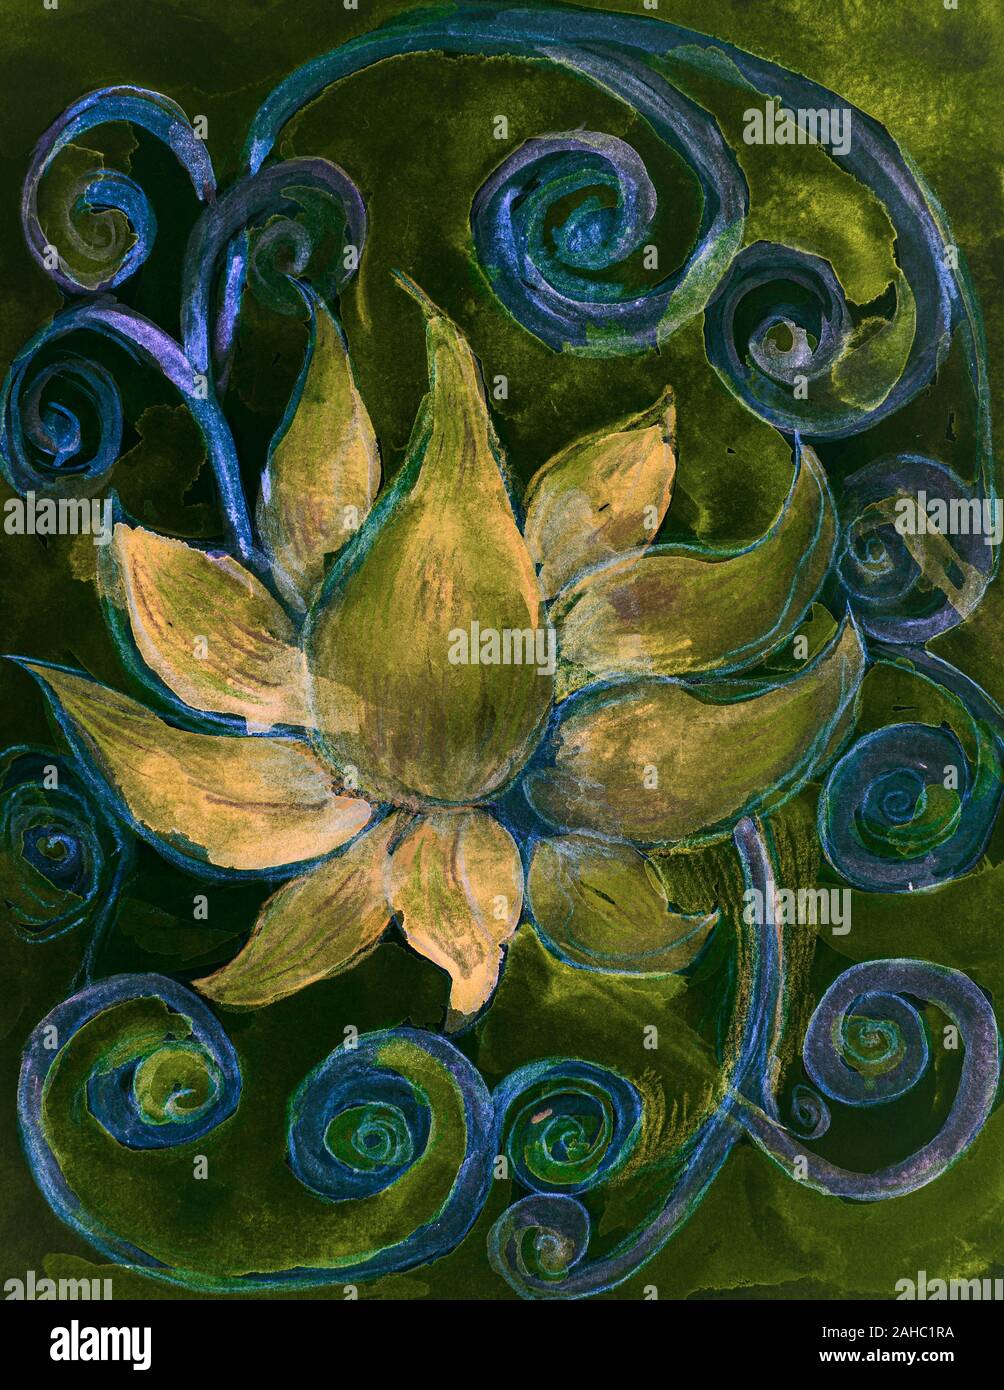 Golden lotus flower with blue curls on a green background. The dabbing technique near the edges gives a soft focus effect due to the altered surface r Stock Photo